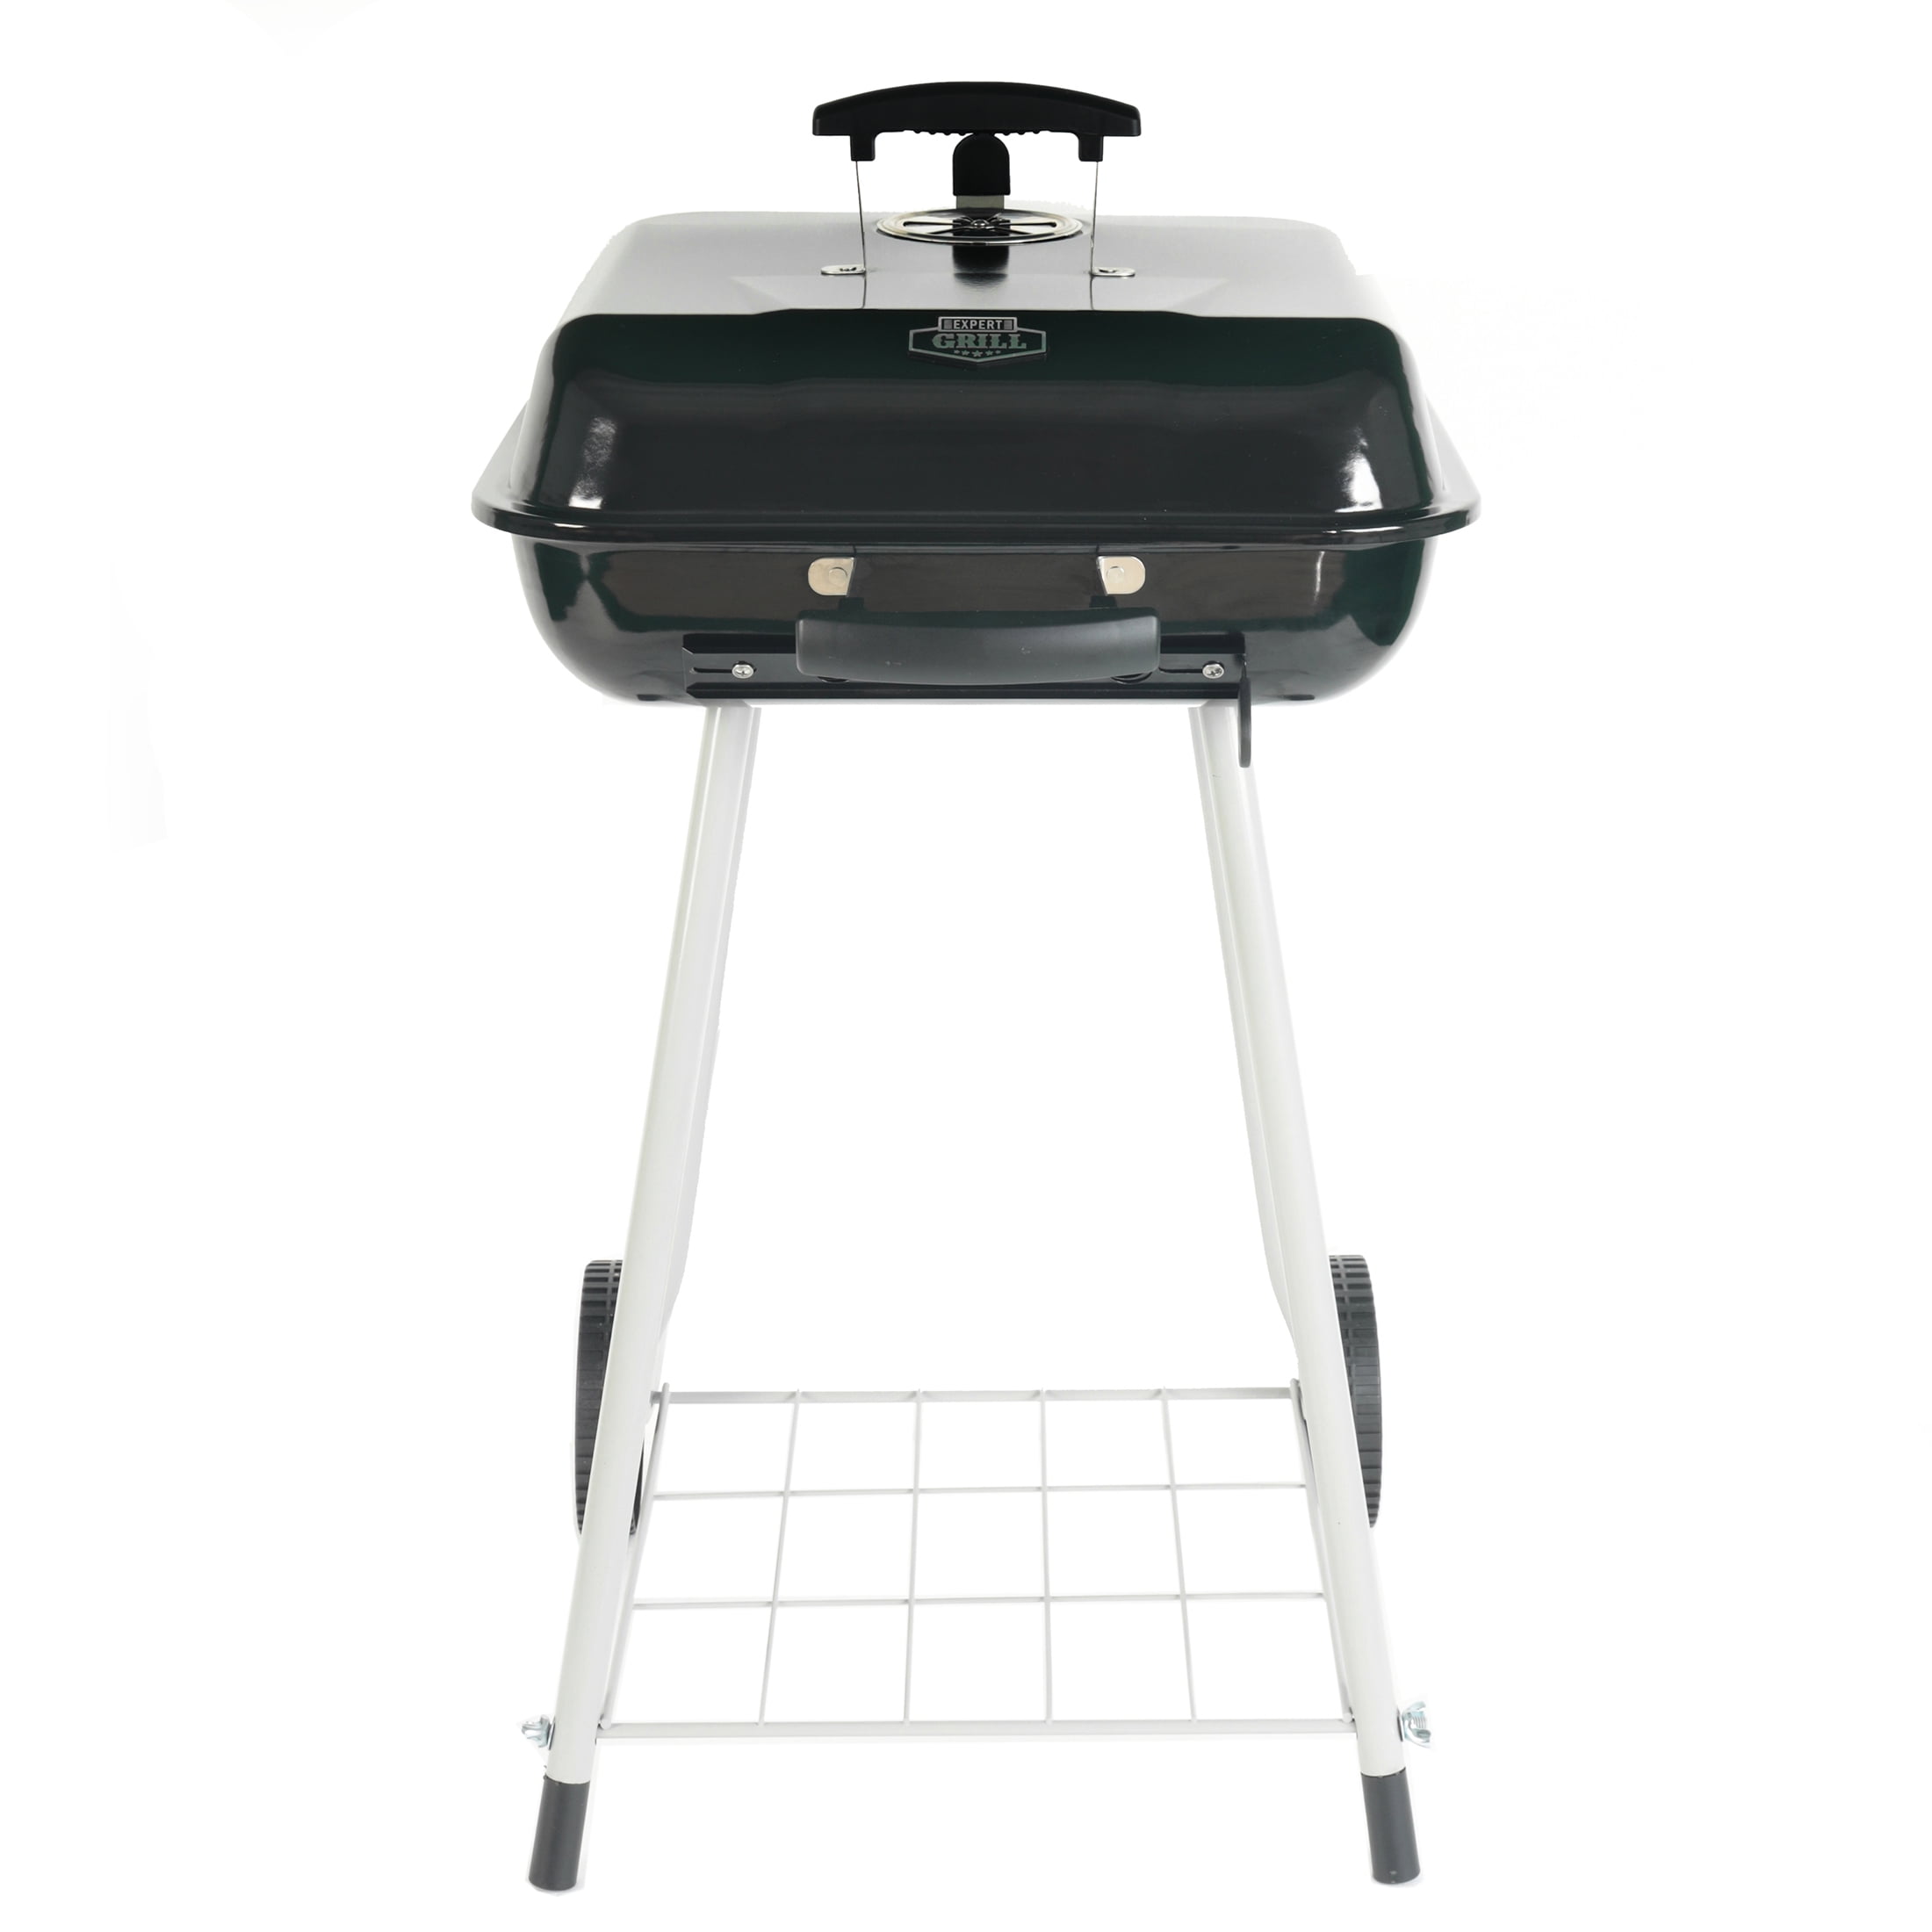 Expert Grill 17.5" Charcoal Grill